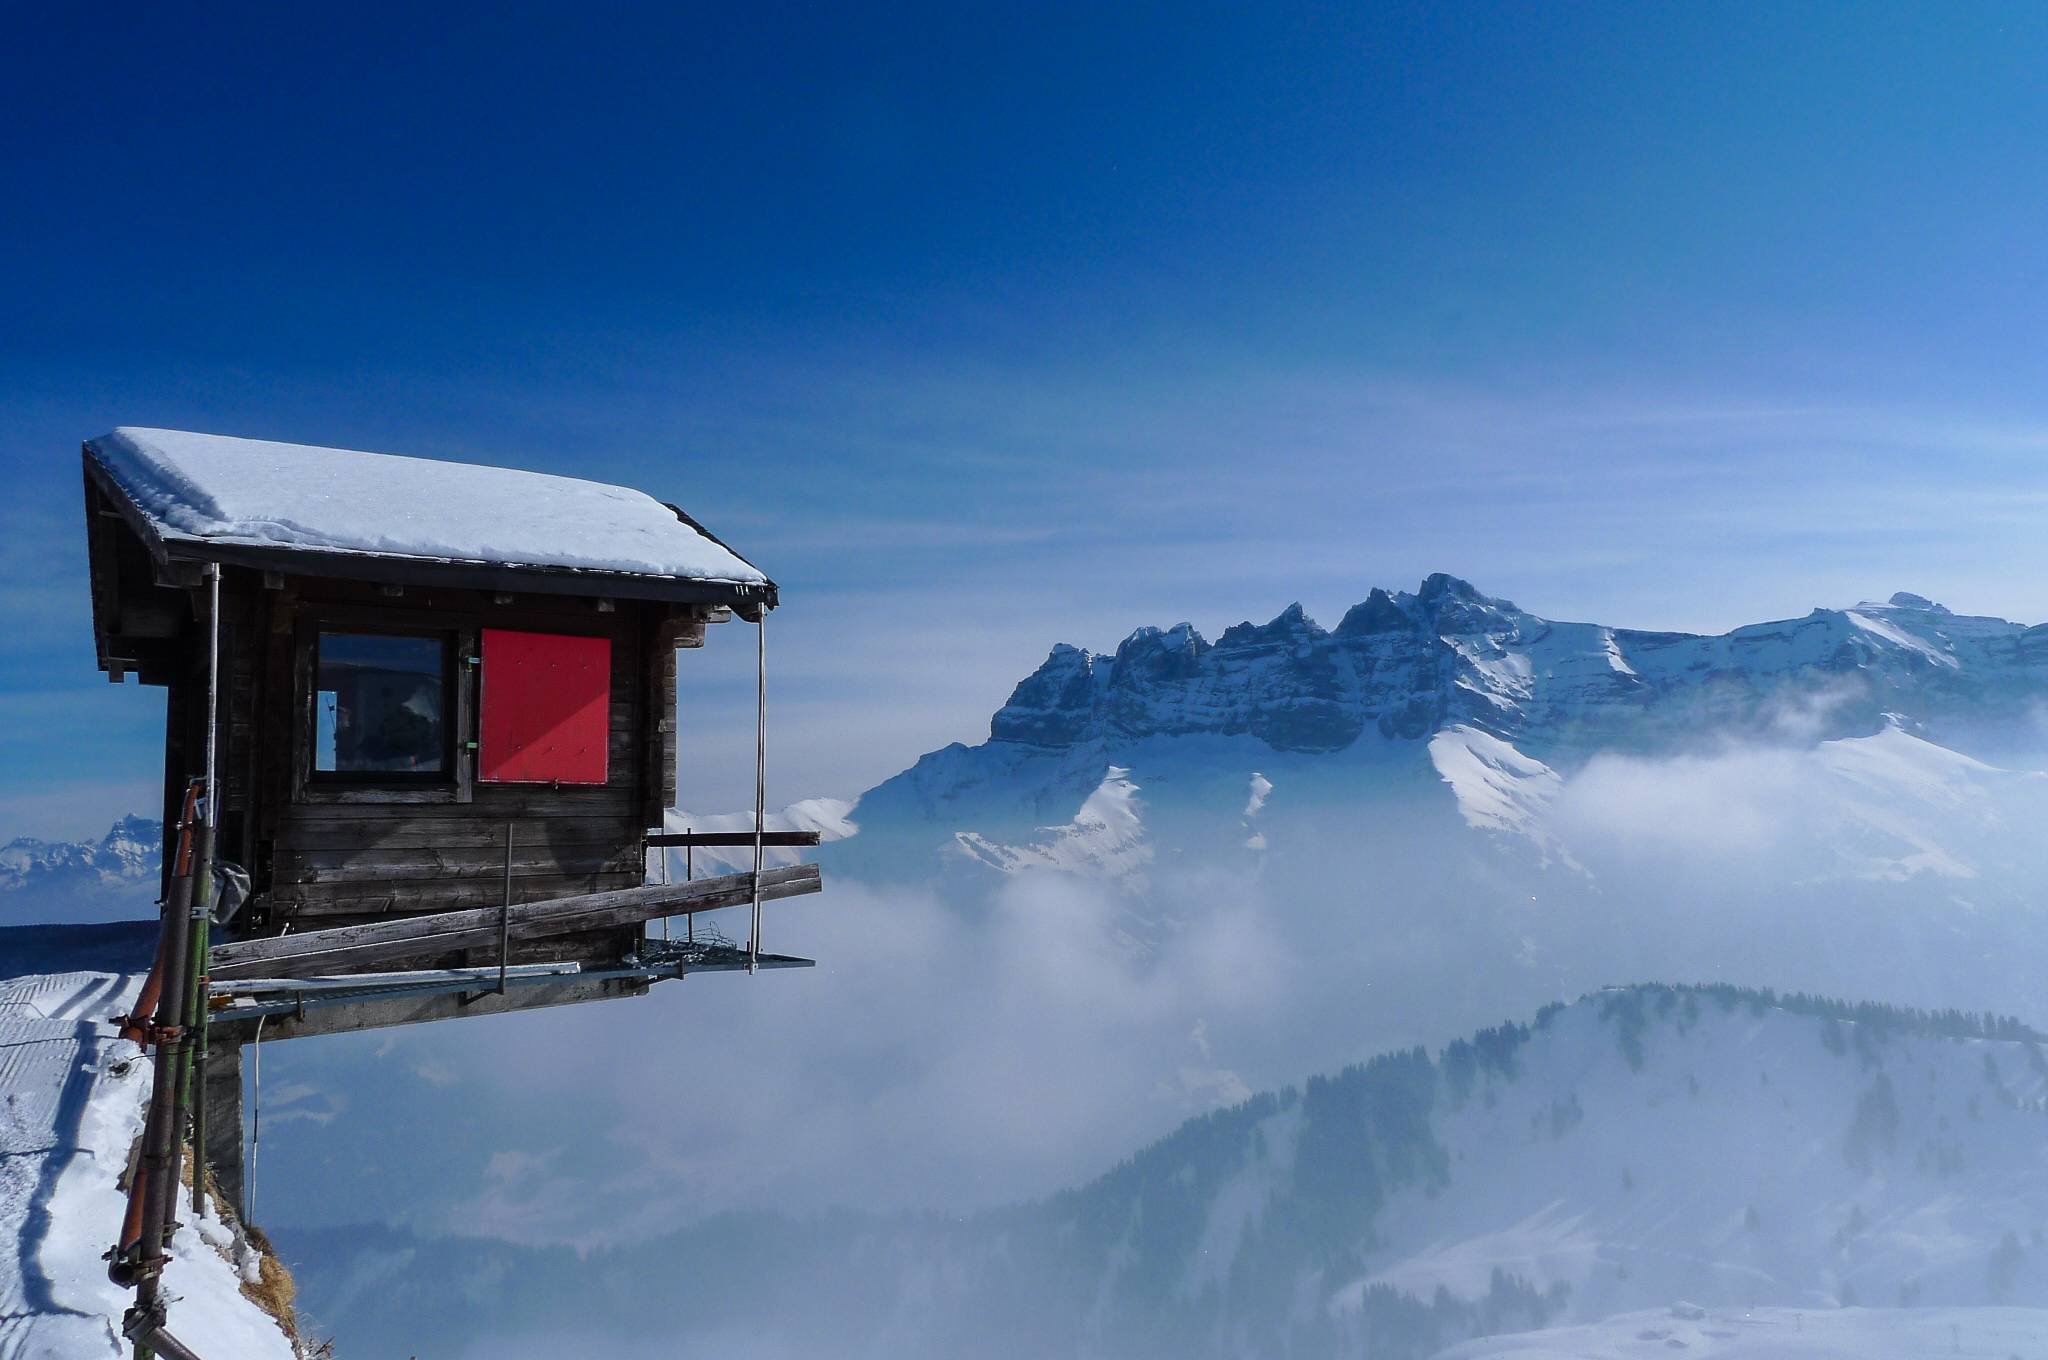 man made, cabin, cold, house, ice, mountain, snow